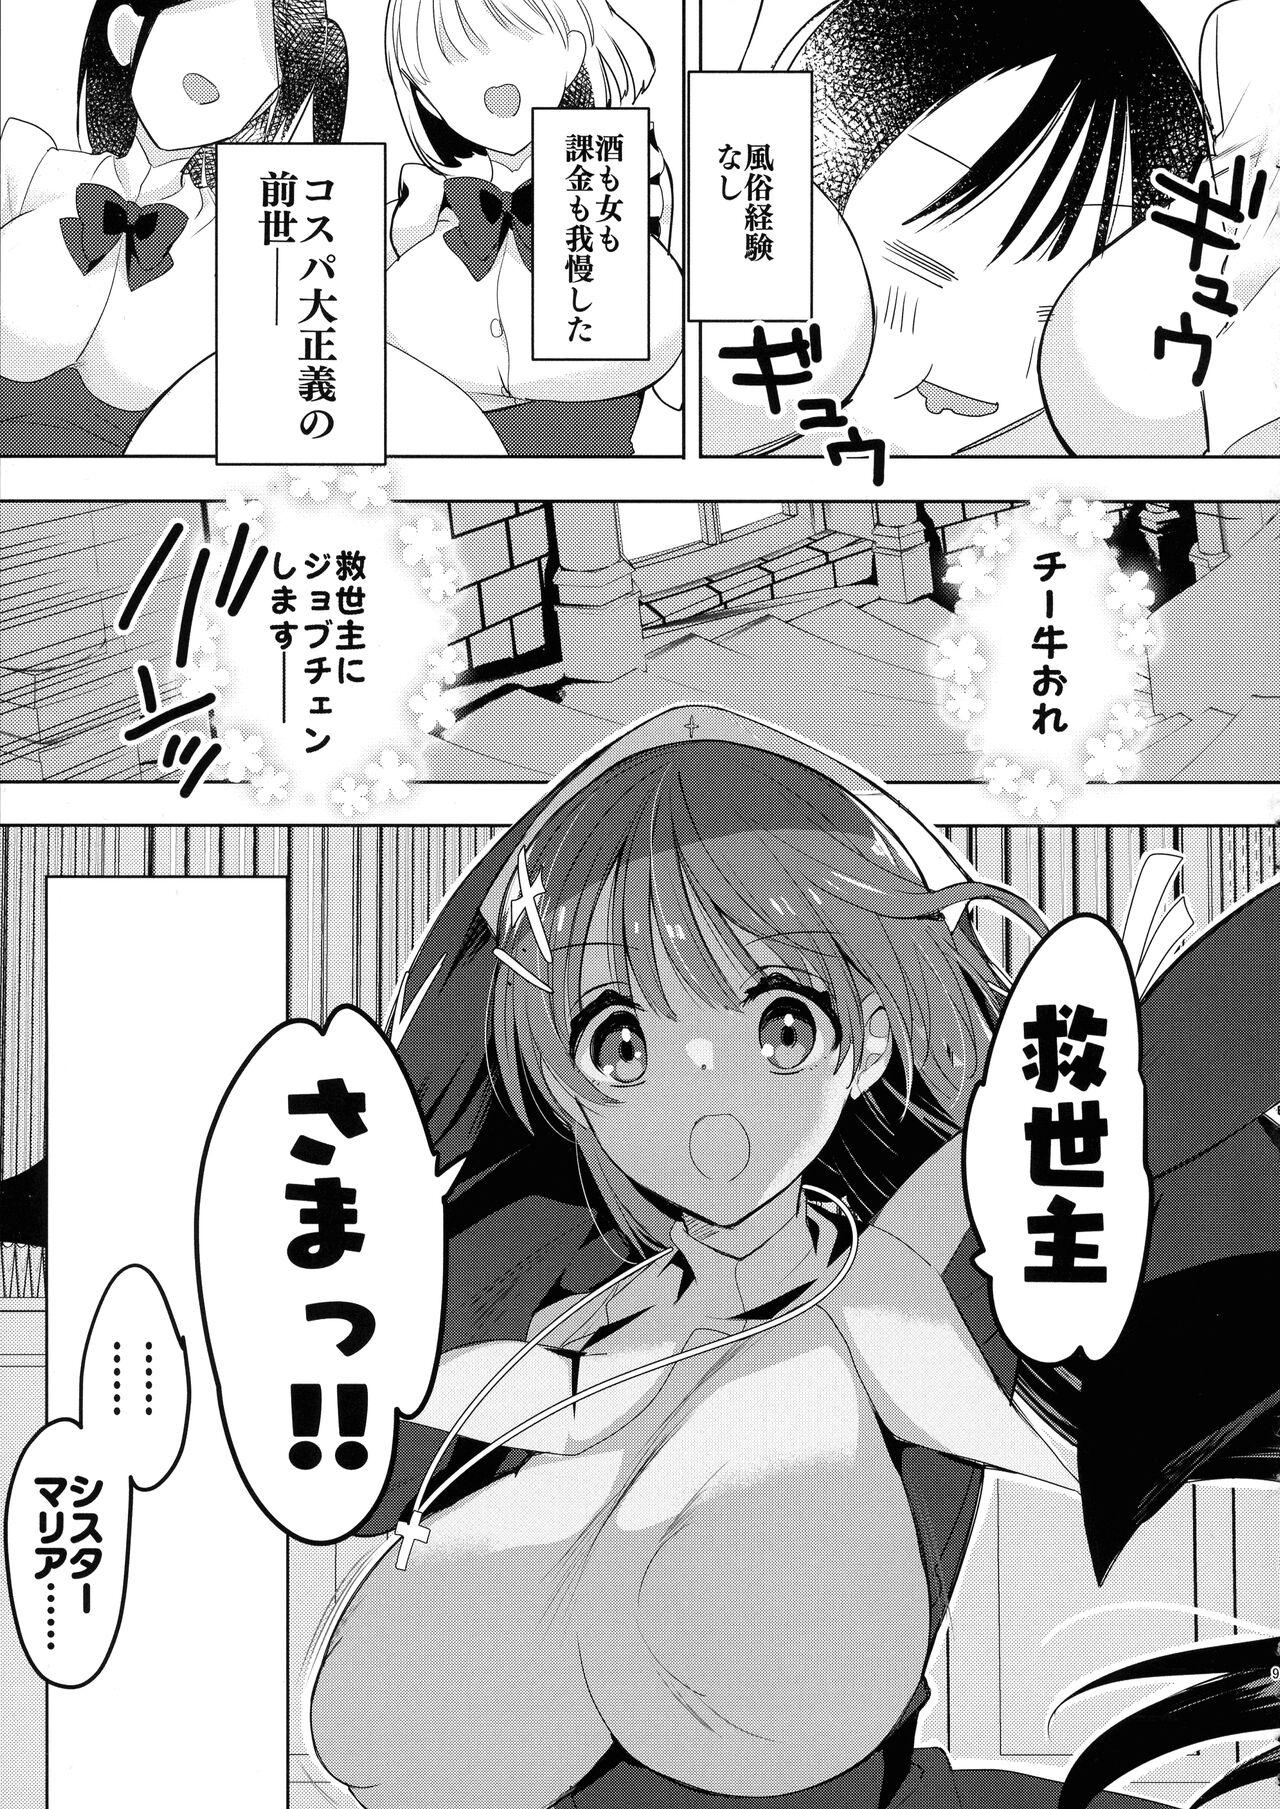 Gemendo Isekai de Bonyuu Sommelier ni Natta Ore, Cheat Skill de Dakkoku Shimasu - I, who became a breast milk sommelier in another world, leaving the country with a cheat skill Livecams - Page 9